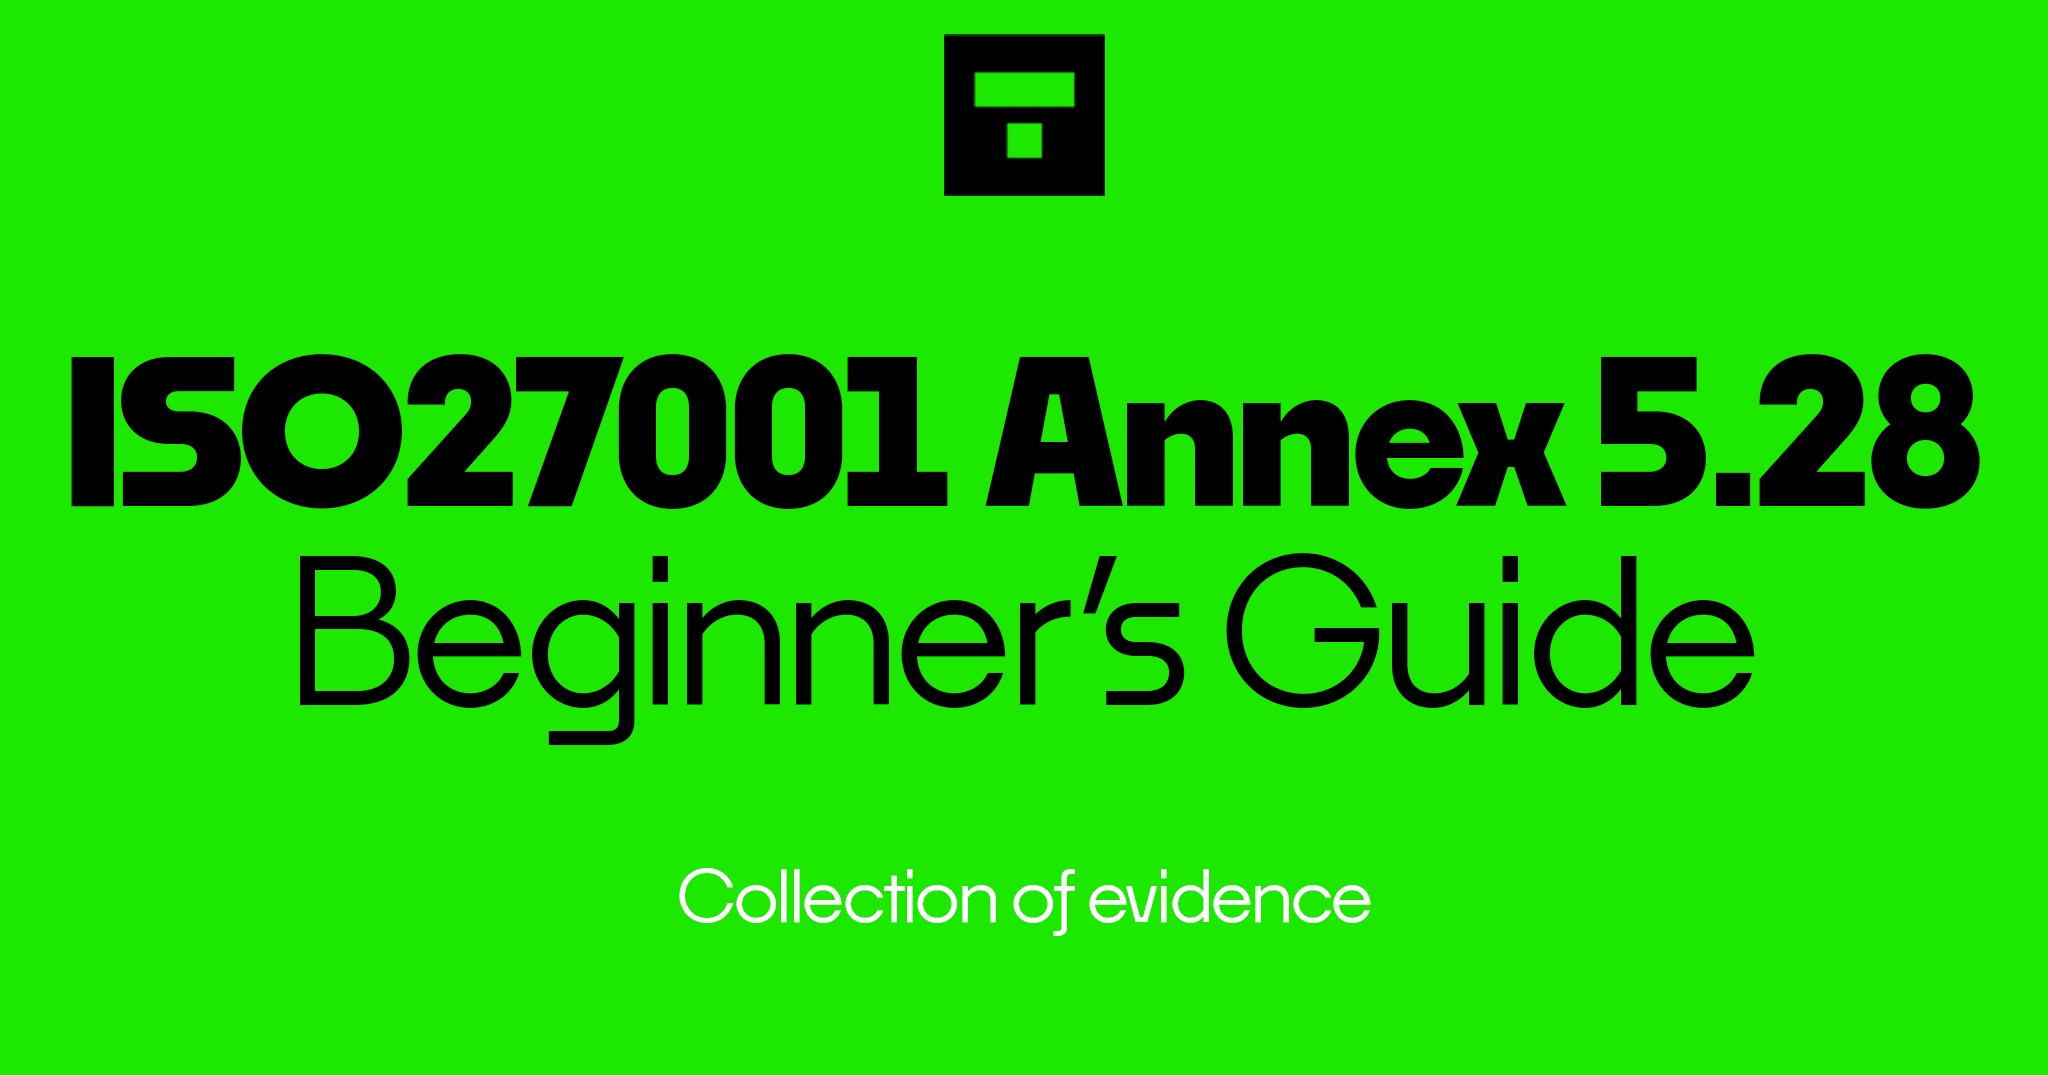 ISO 27001 Annex A 5.28 Collection of evidence Beginner's Guide